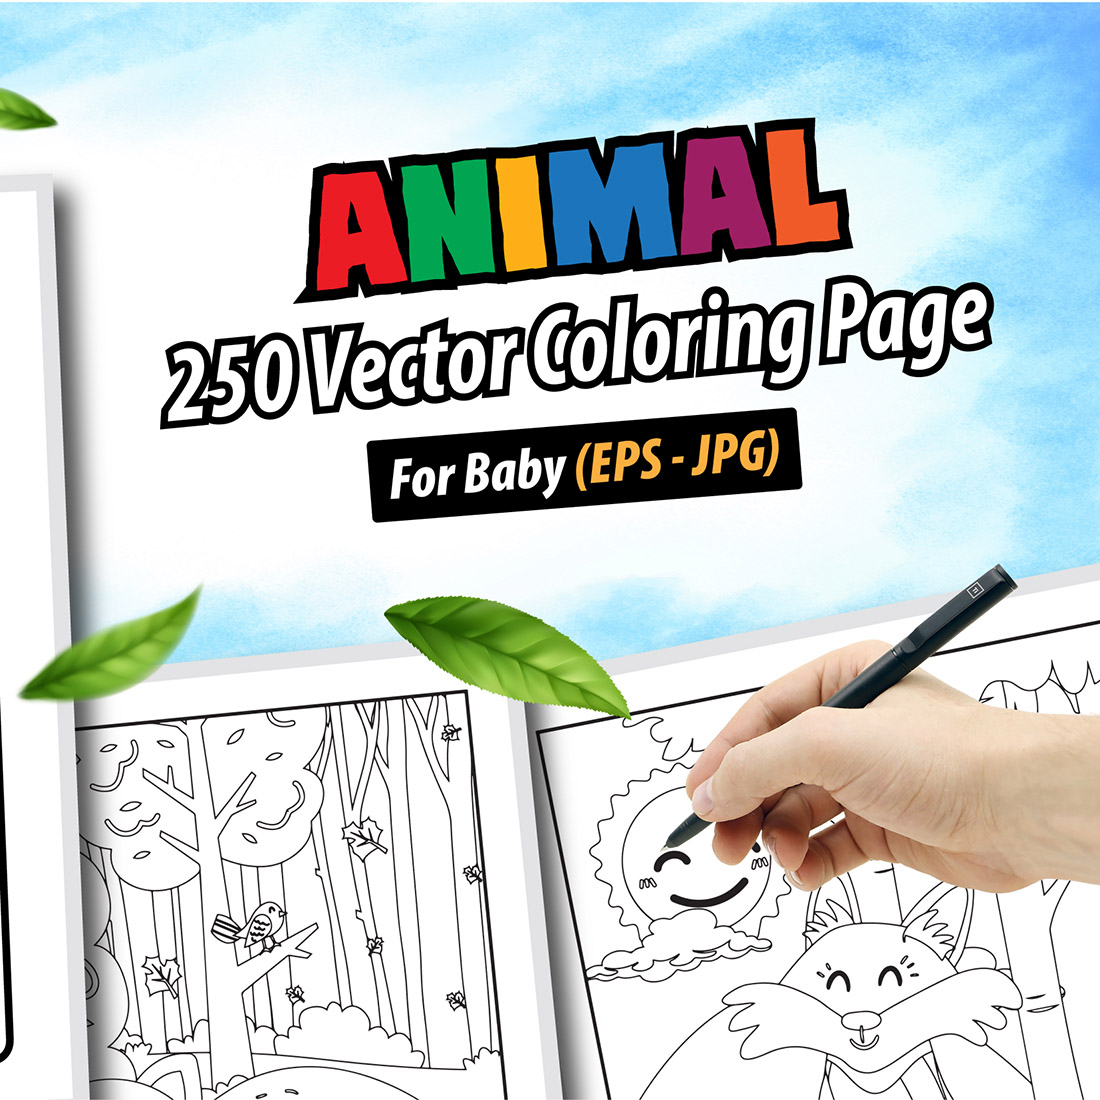 250 Vector Animals Coloring Pages cover image.